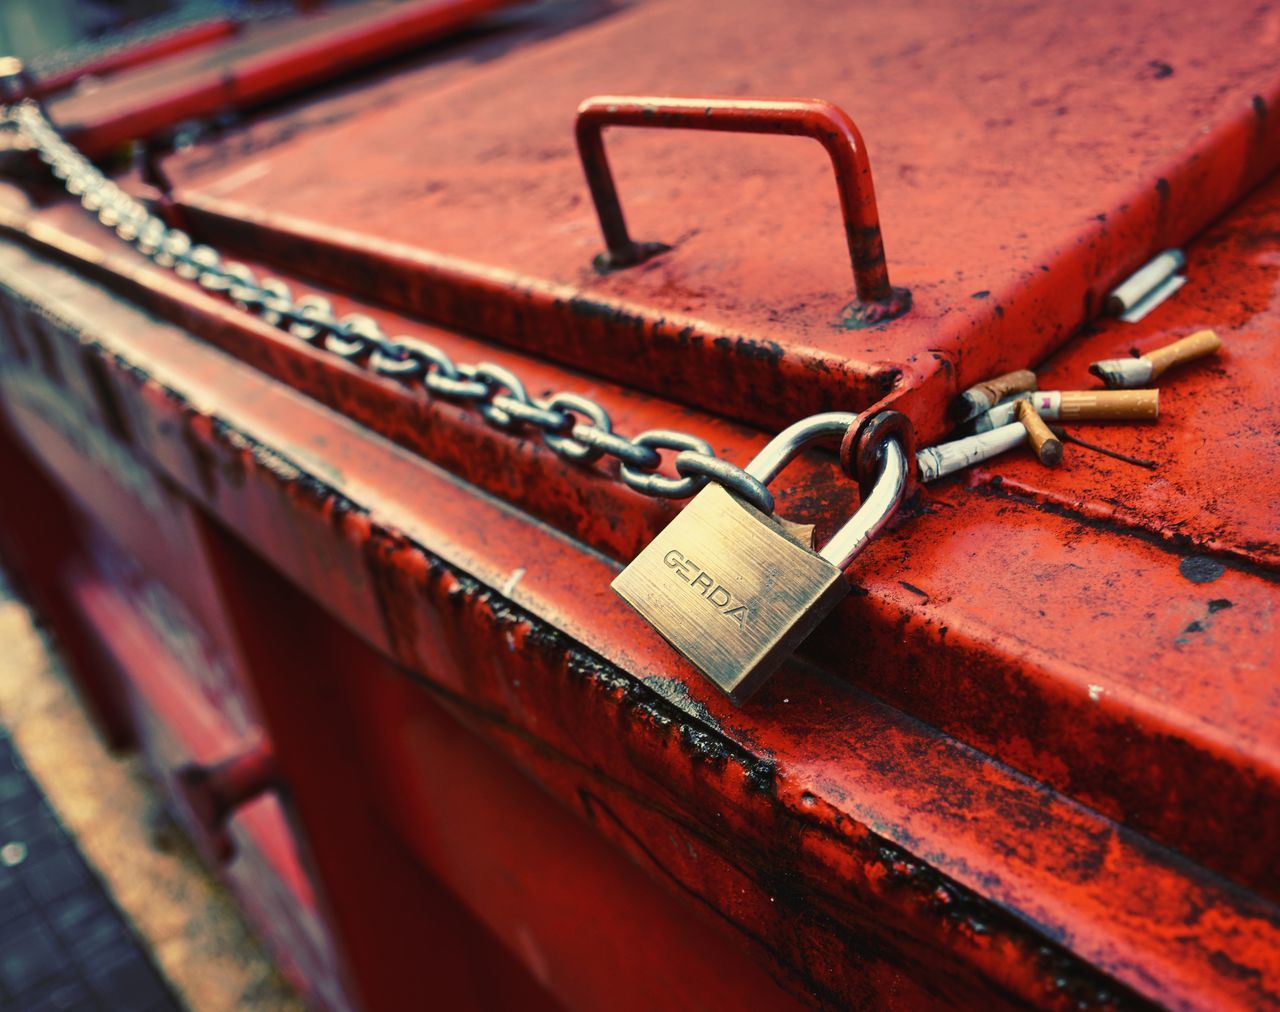 metal, red, safety, security, protection, lock, text, padlock, communication, close-up, rusty, belief, architecture, no people, positive emotion, religion, old, selective focus, day, hope - concept